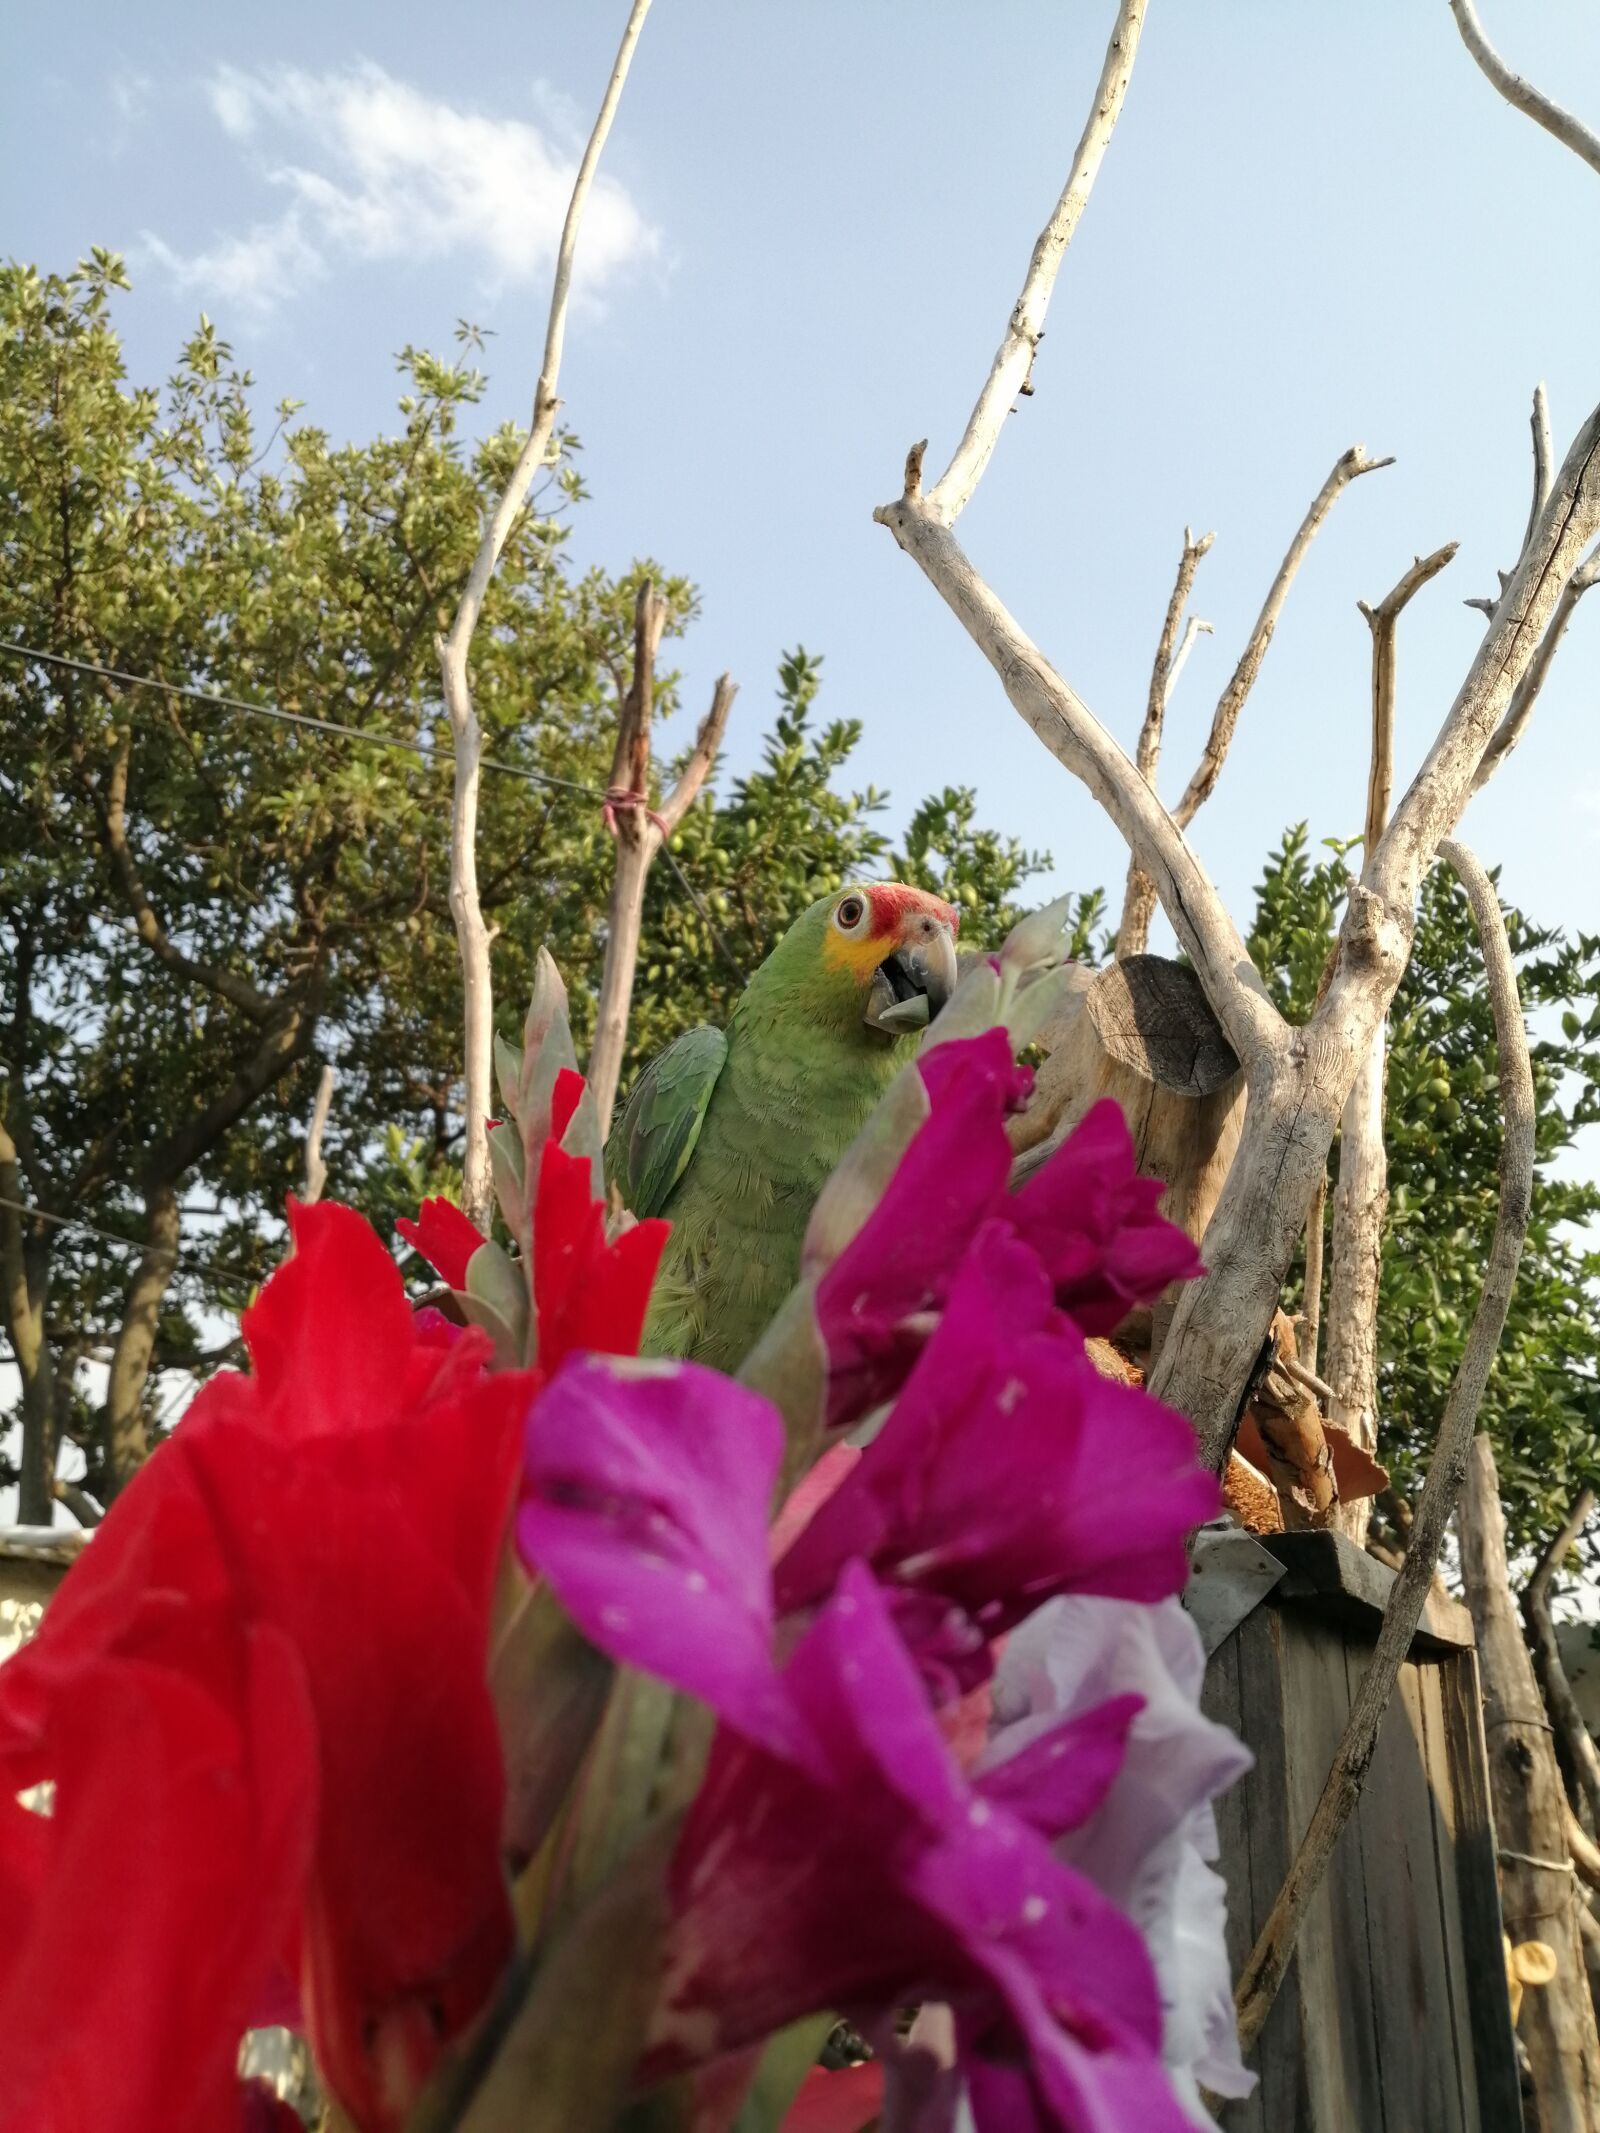 HUAWEI JKM-LX3 sample photo. Parrot, green, gladiola photography